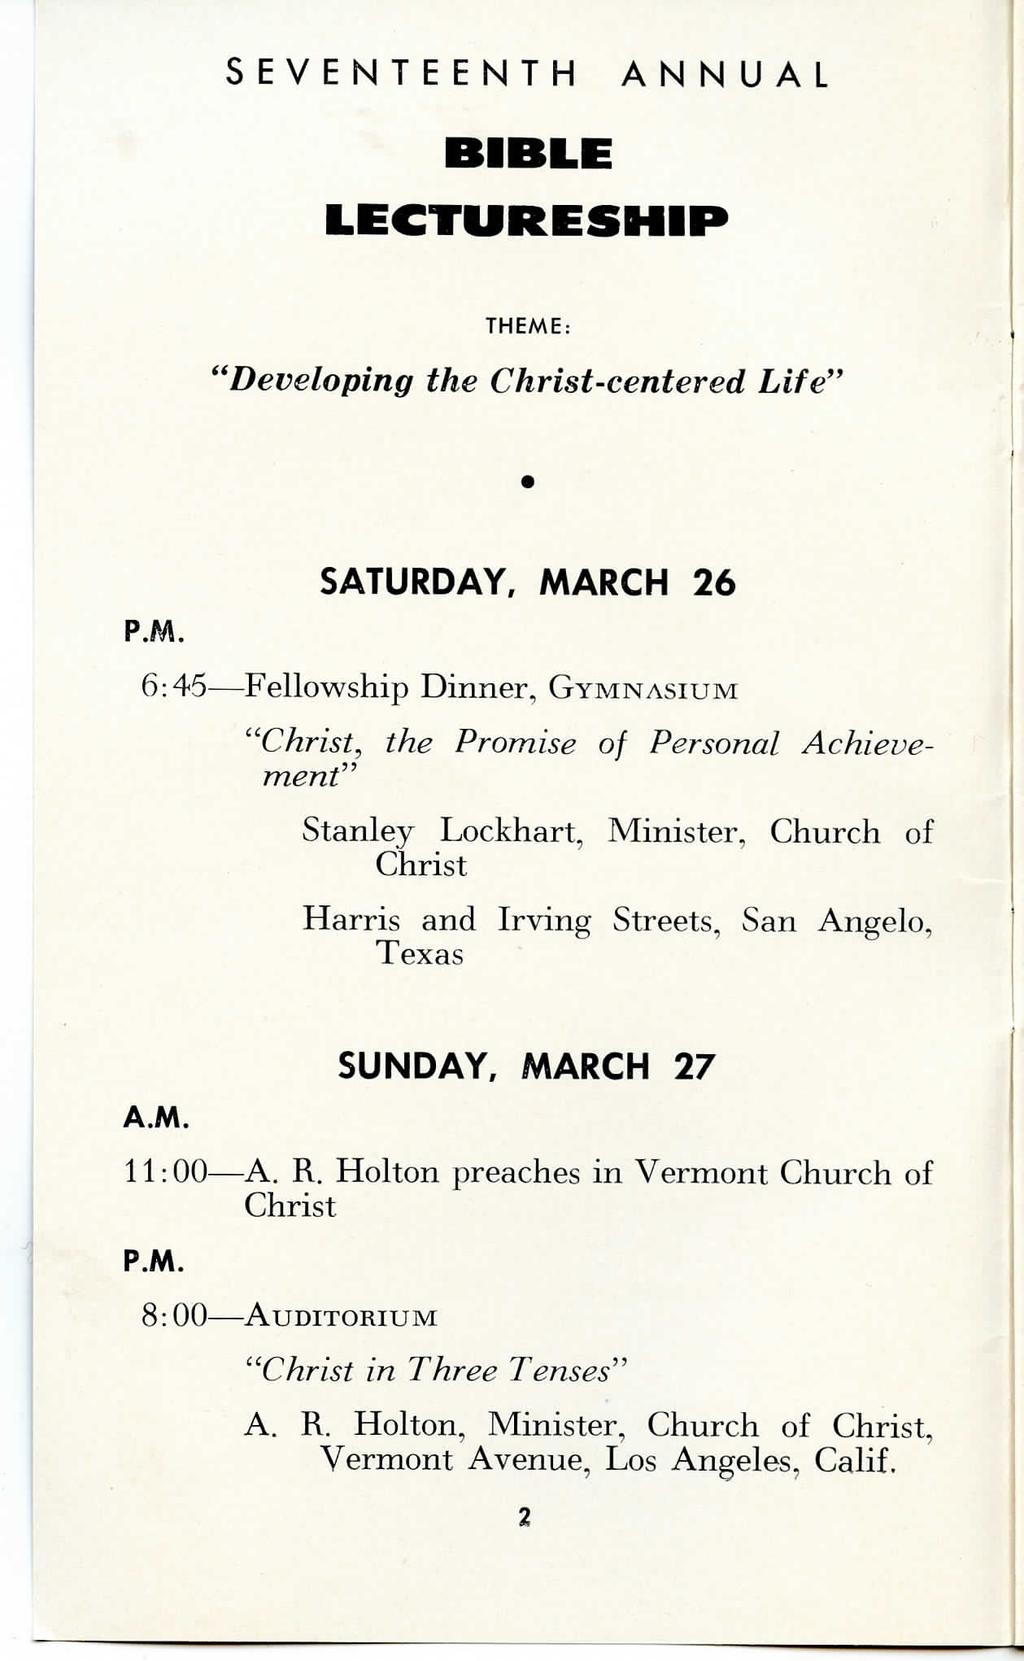 SEVENTEENTH ANNUAL BIBLE LECTURESHIP THEME: "Developing the Christ-centered Life" SATURDAY, MARCH 26 6:45 Fellowship Dinner, GYMNASIUM "Christ, the Promise of Personal Achievement" Stanley Lockhart,